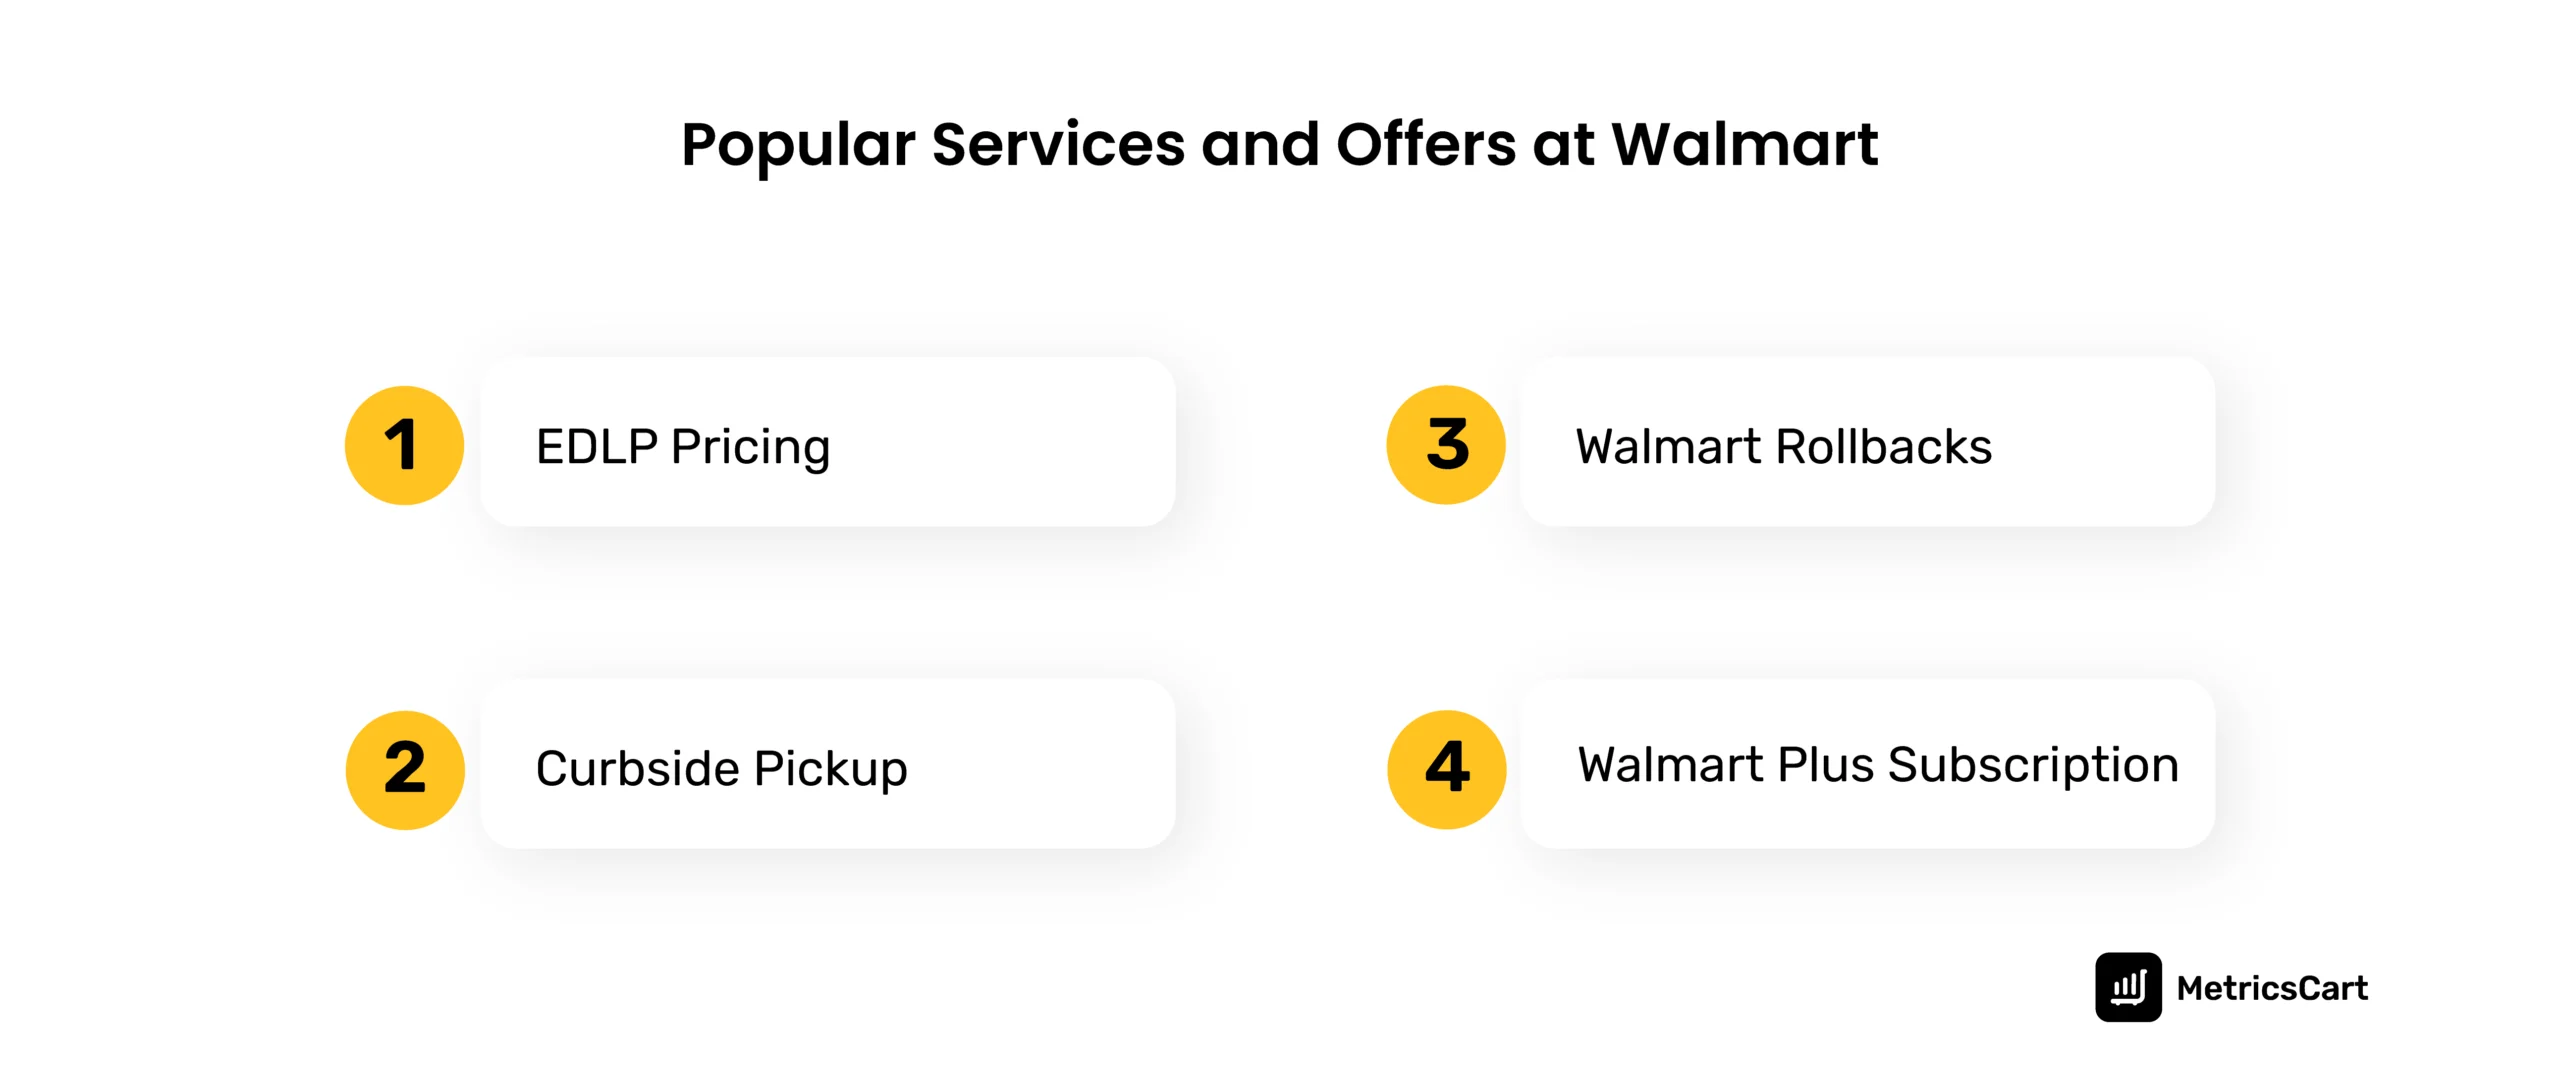 The popular services and offers at Walmart